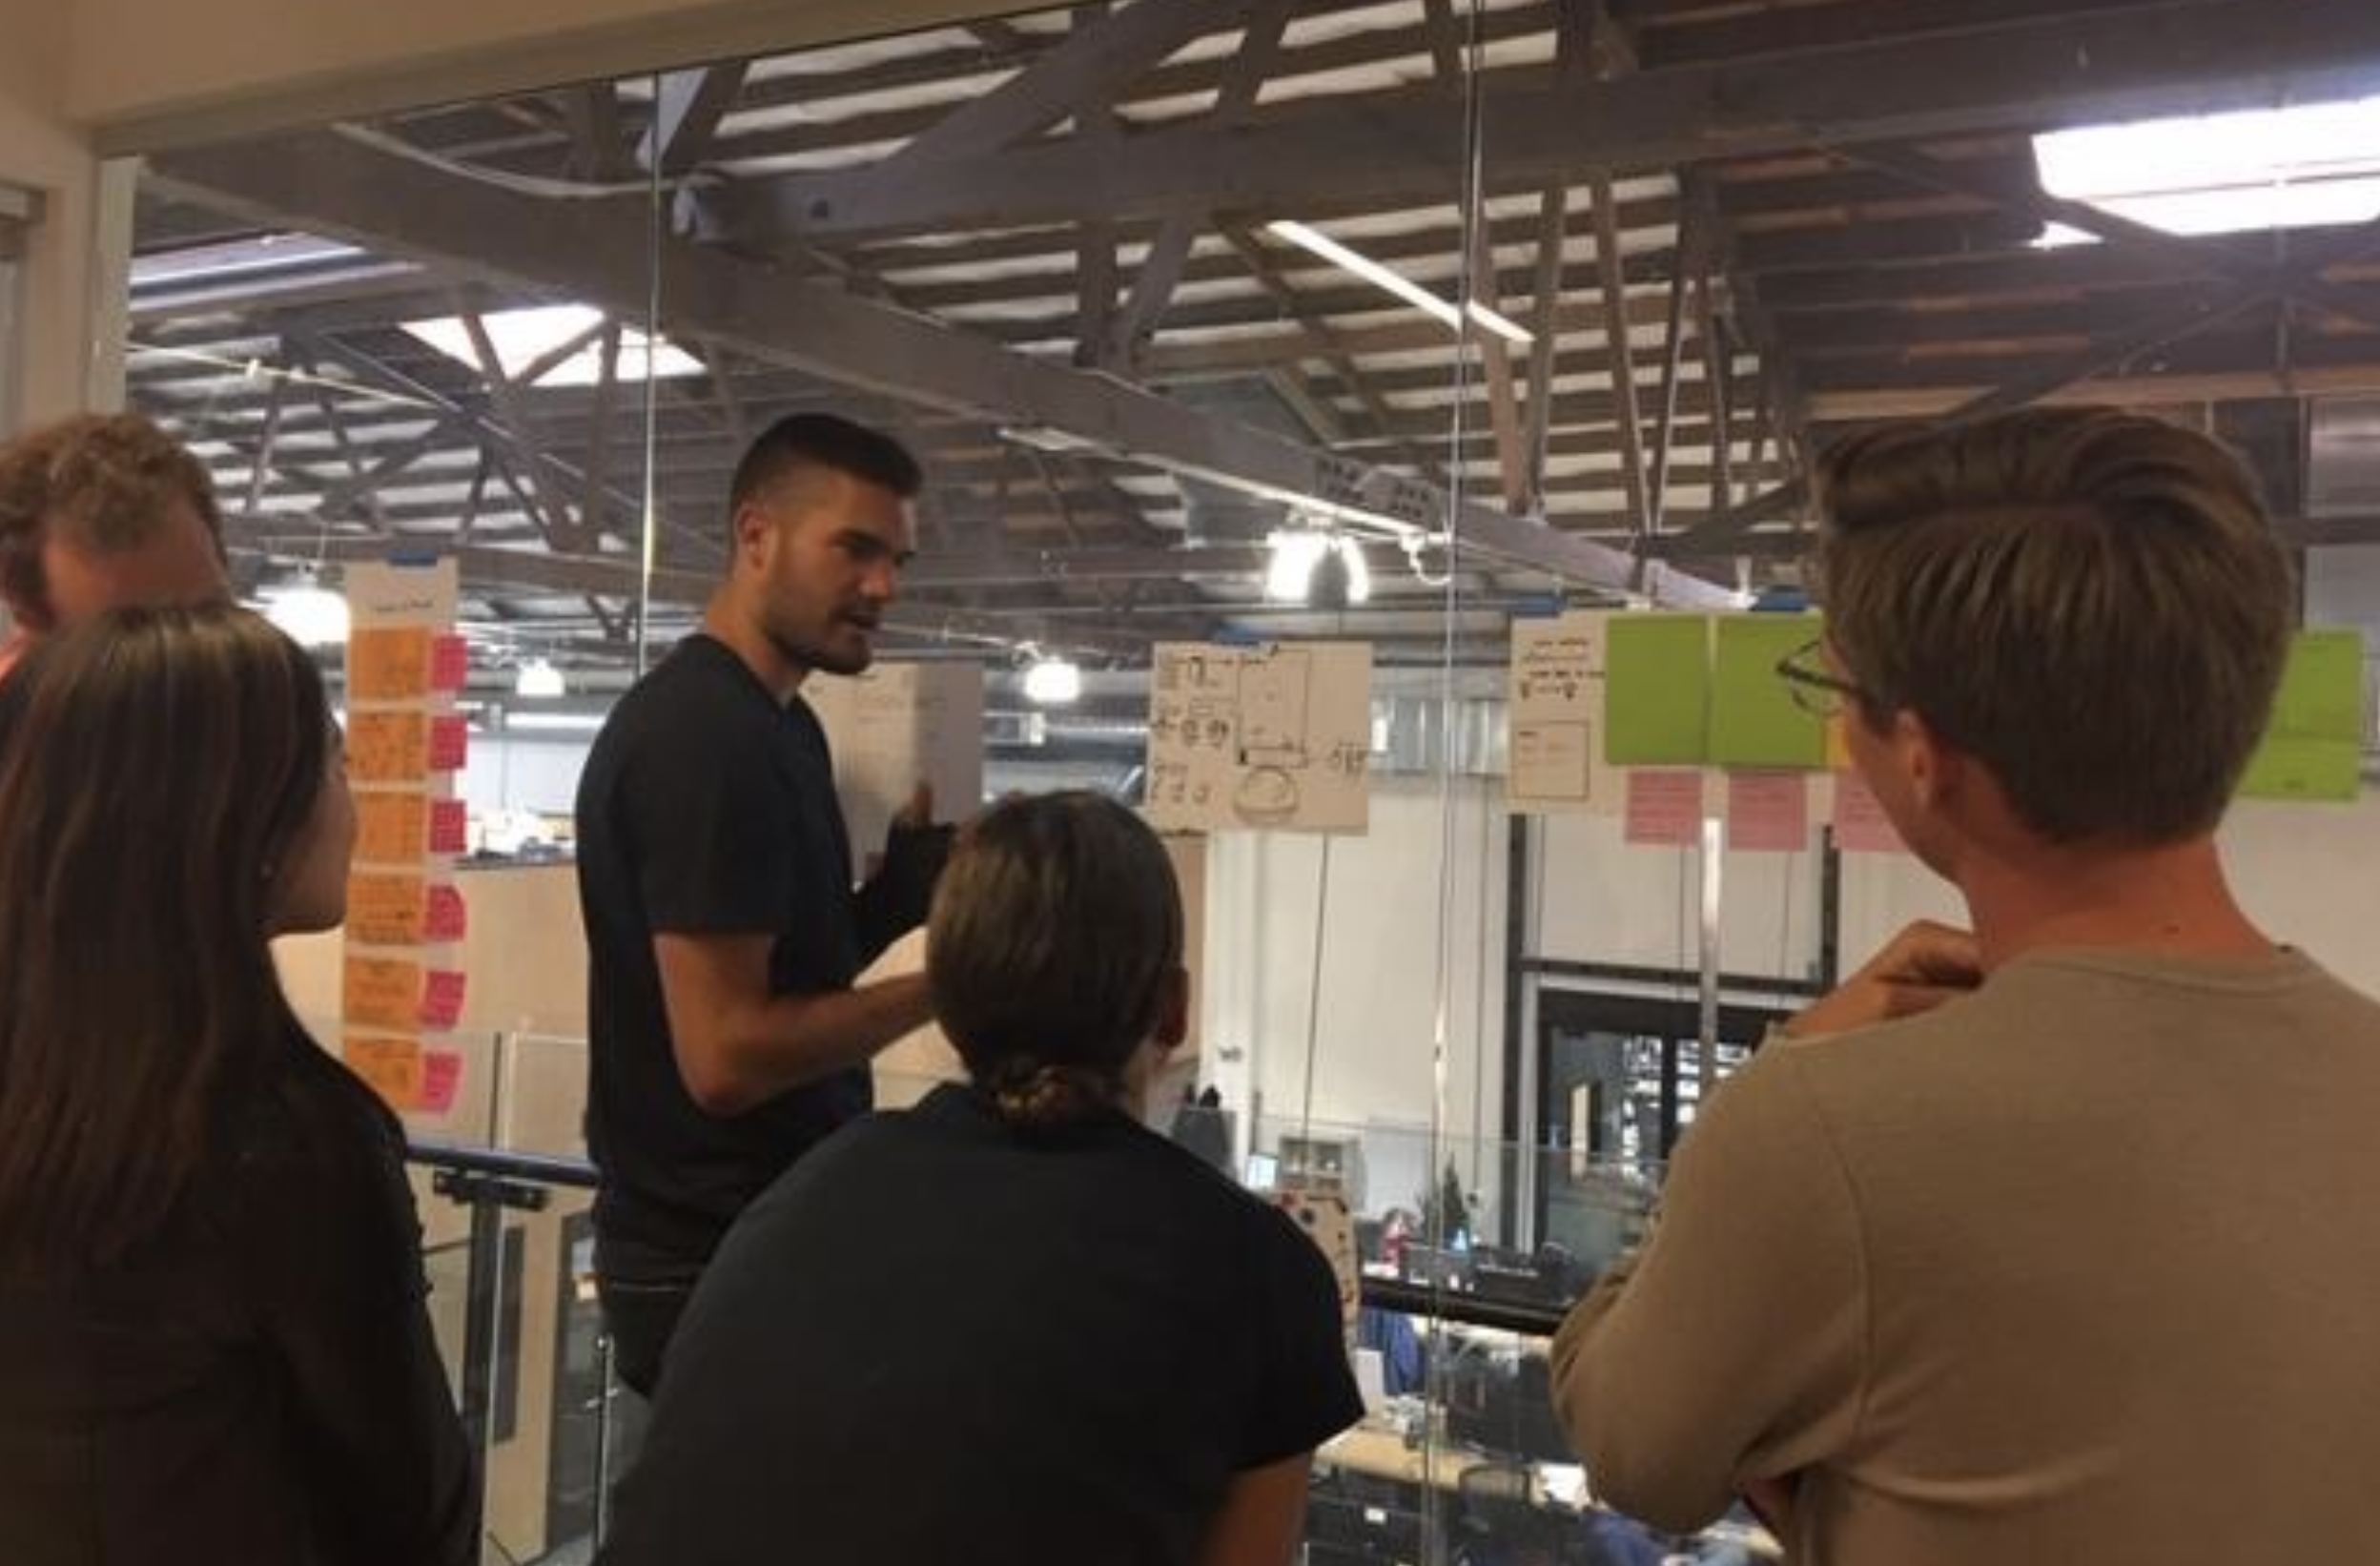 Image of Brian standing in front of a whiteboard with his team during the design sprint.